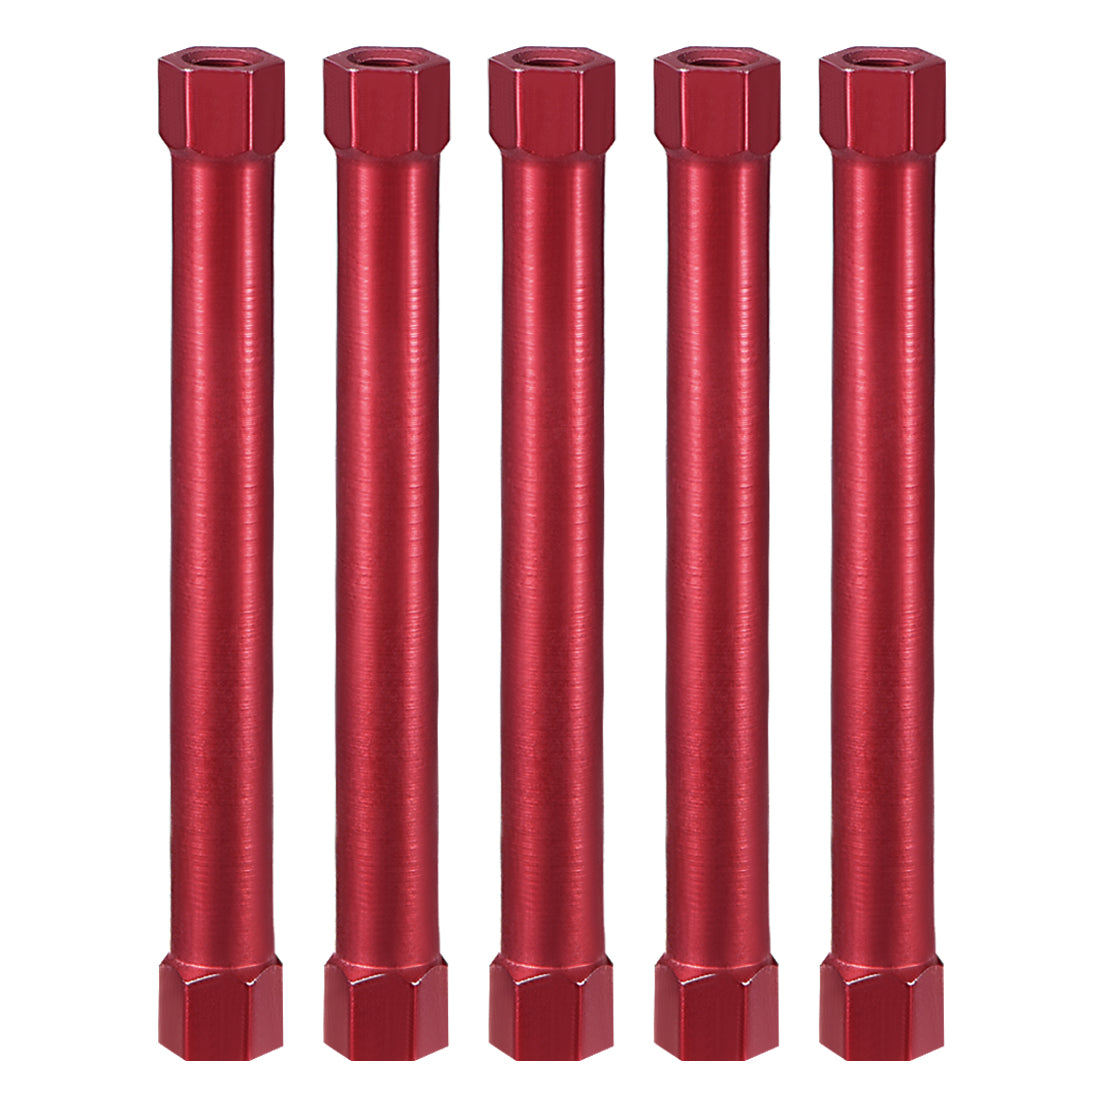 uxcell Uxcell Hex Aluminum Standoff Spacer Column M3x60mm,for RC Airplane,FPV Quadcopter,CNC,Red,5pcs